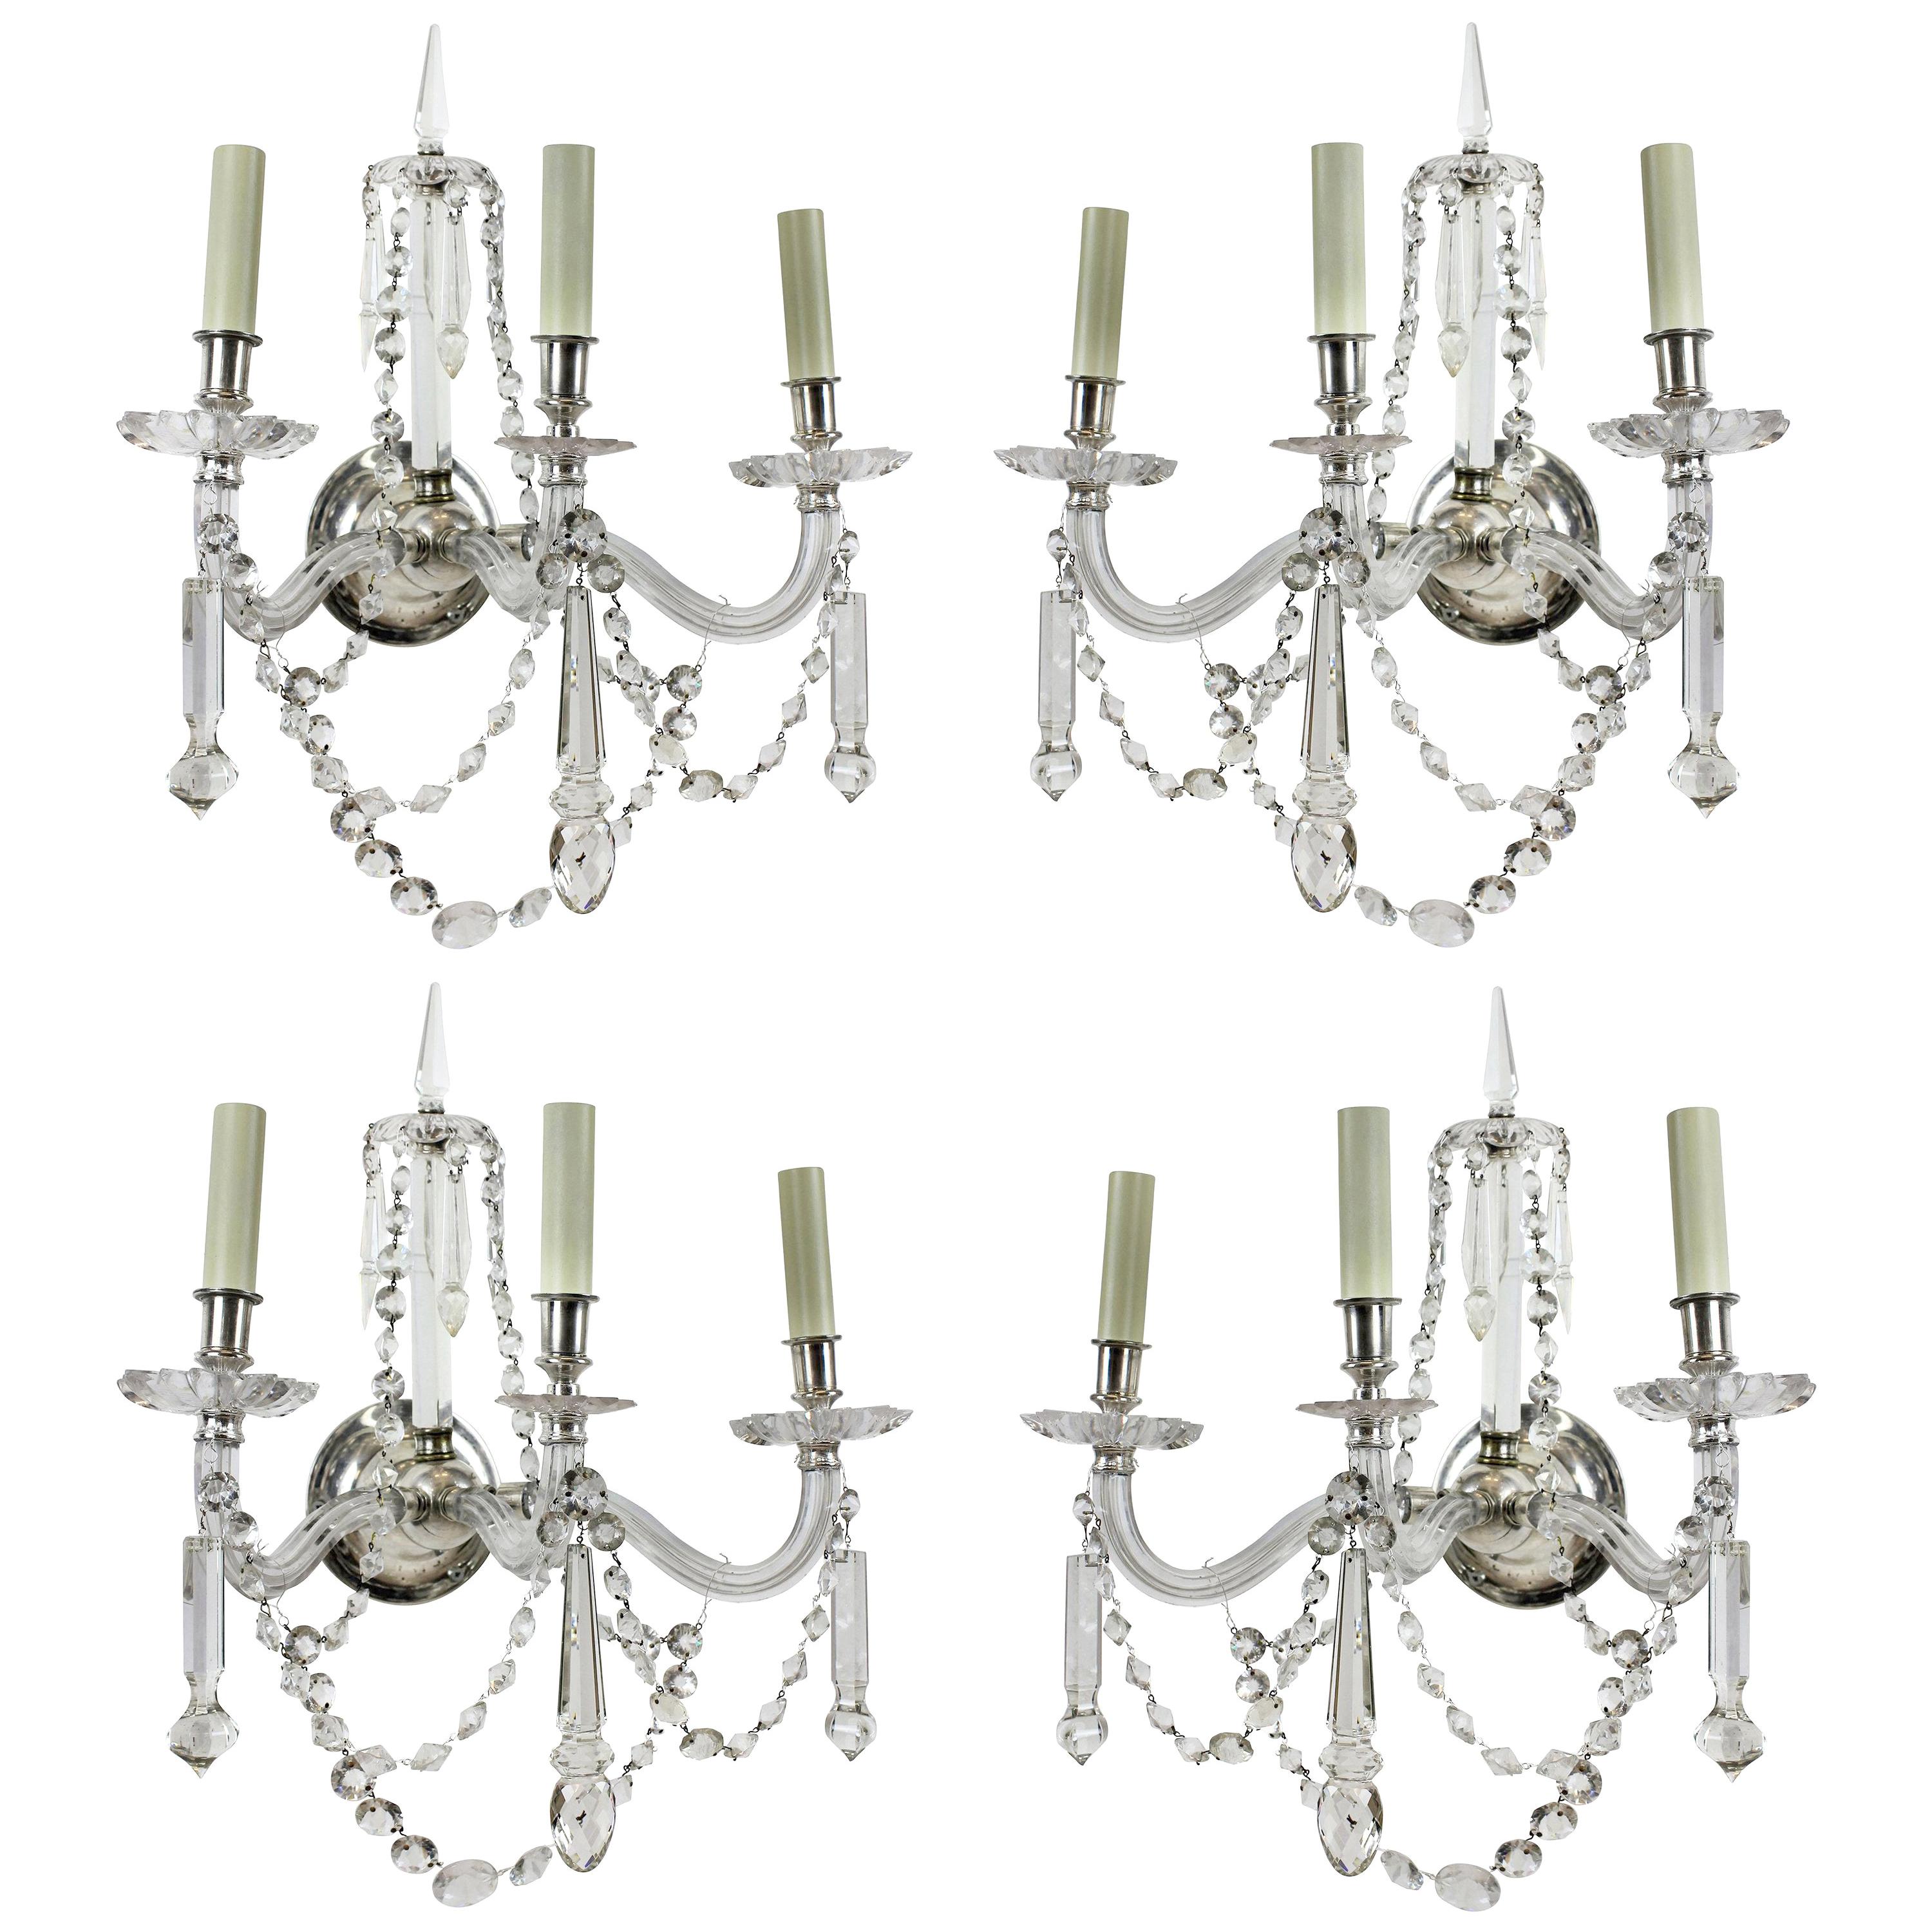 Set of Four Large 19th Century English Cut-Glass Wall Lights